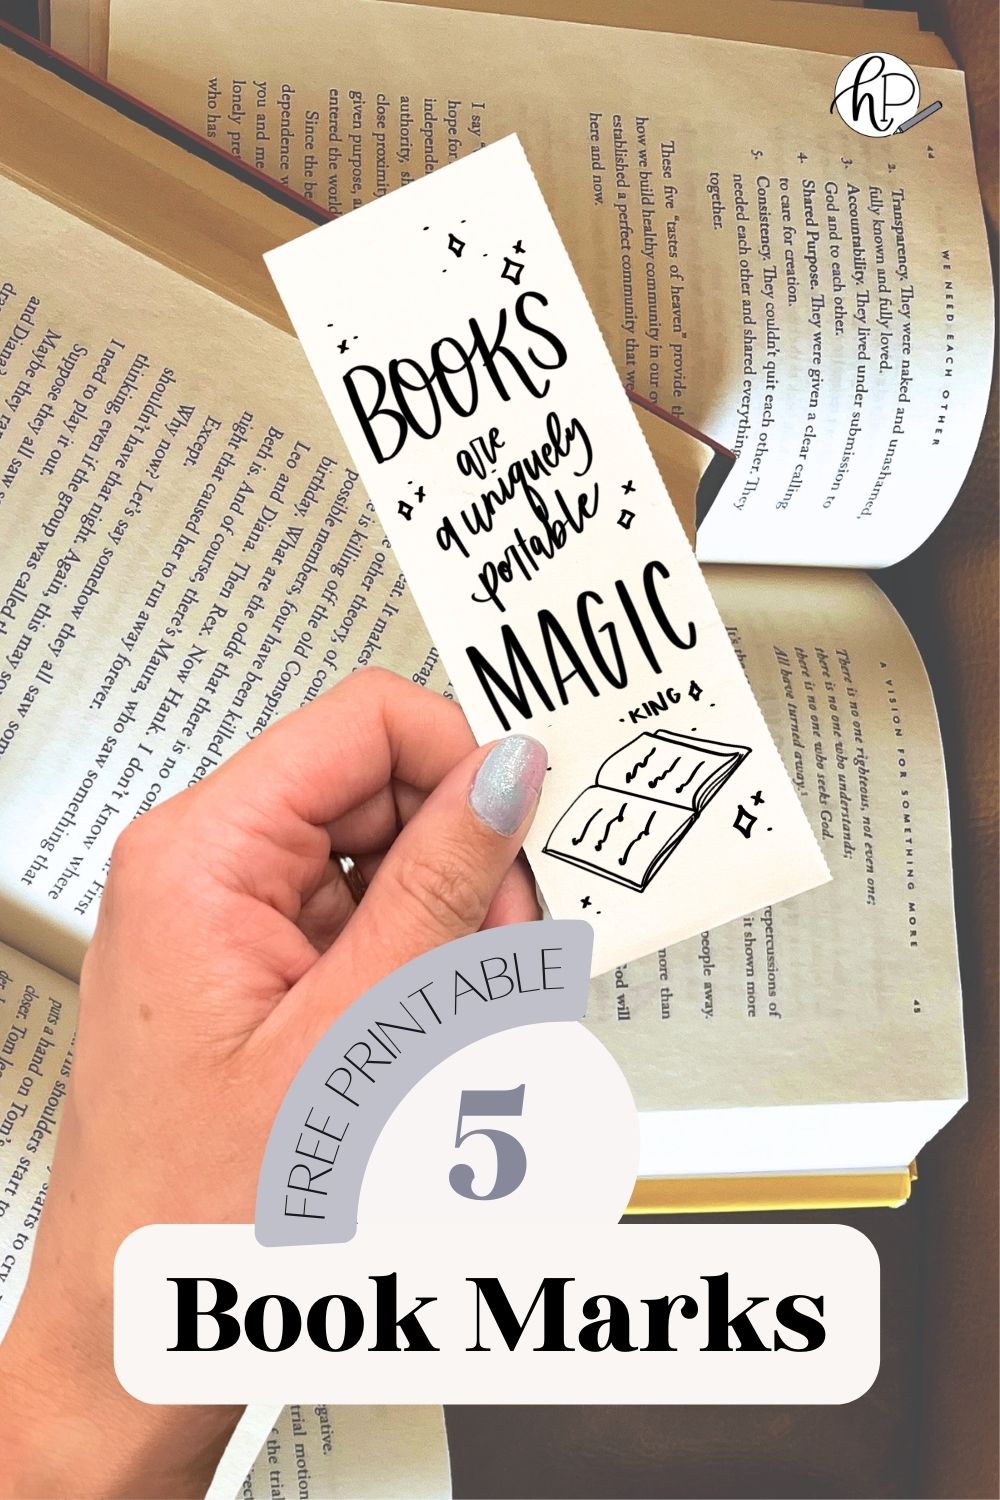 5 Free printable bookmarks with quotes about reading. image of one book mark being held over books. bookmark reads: books are a uniquely portable magic